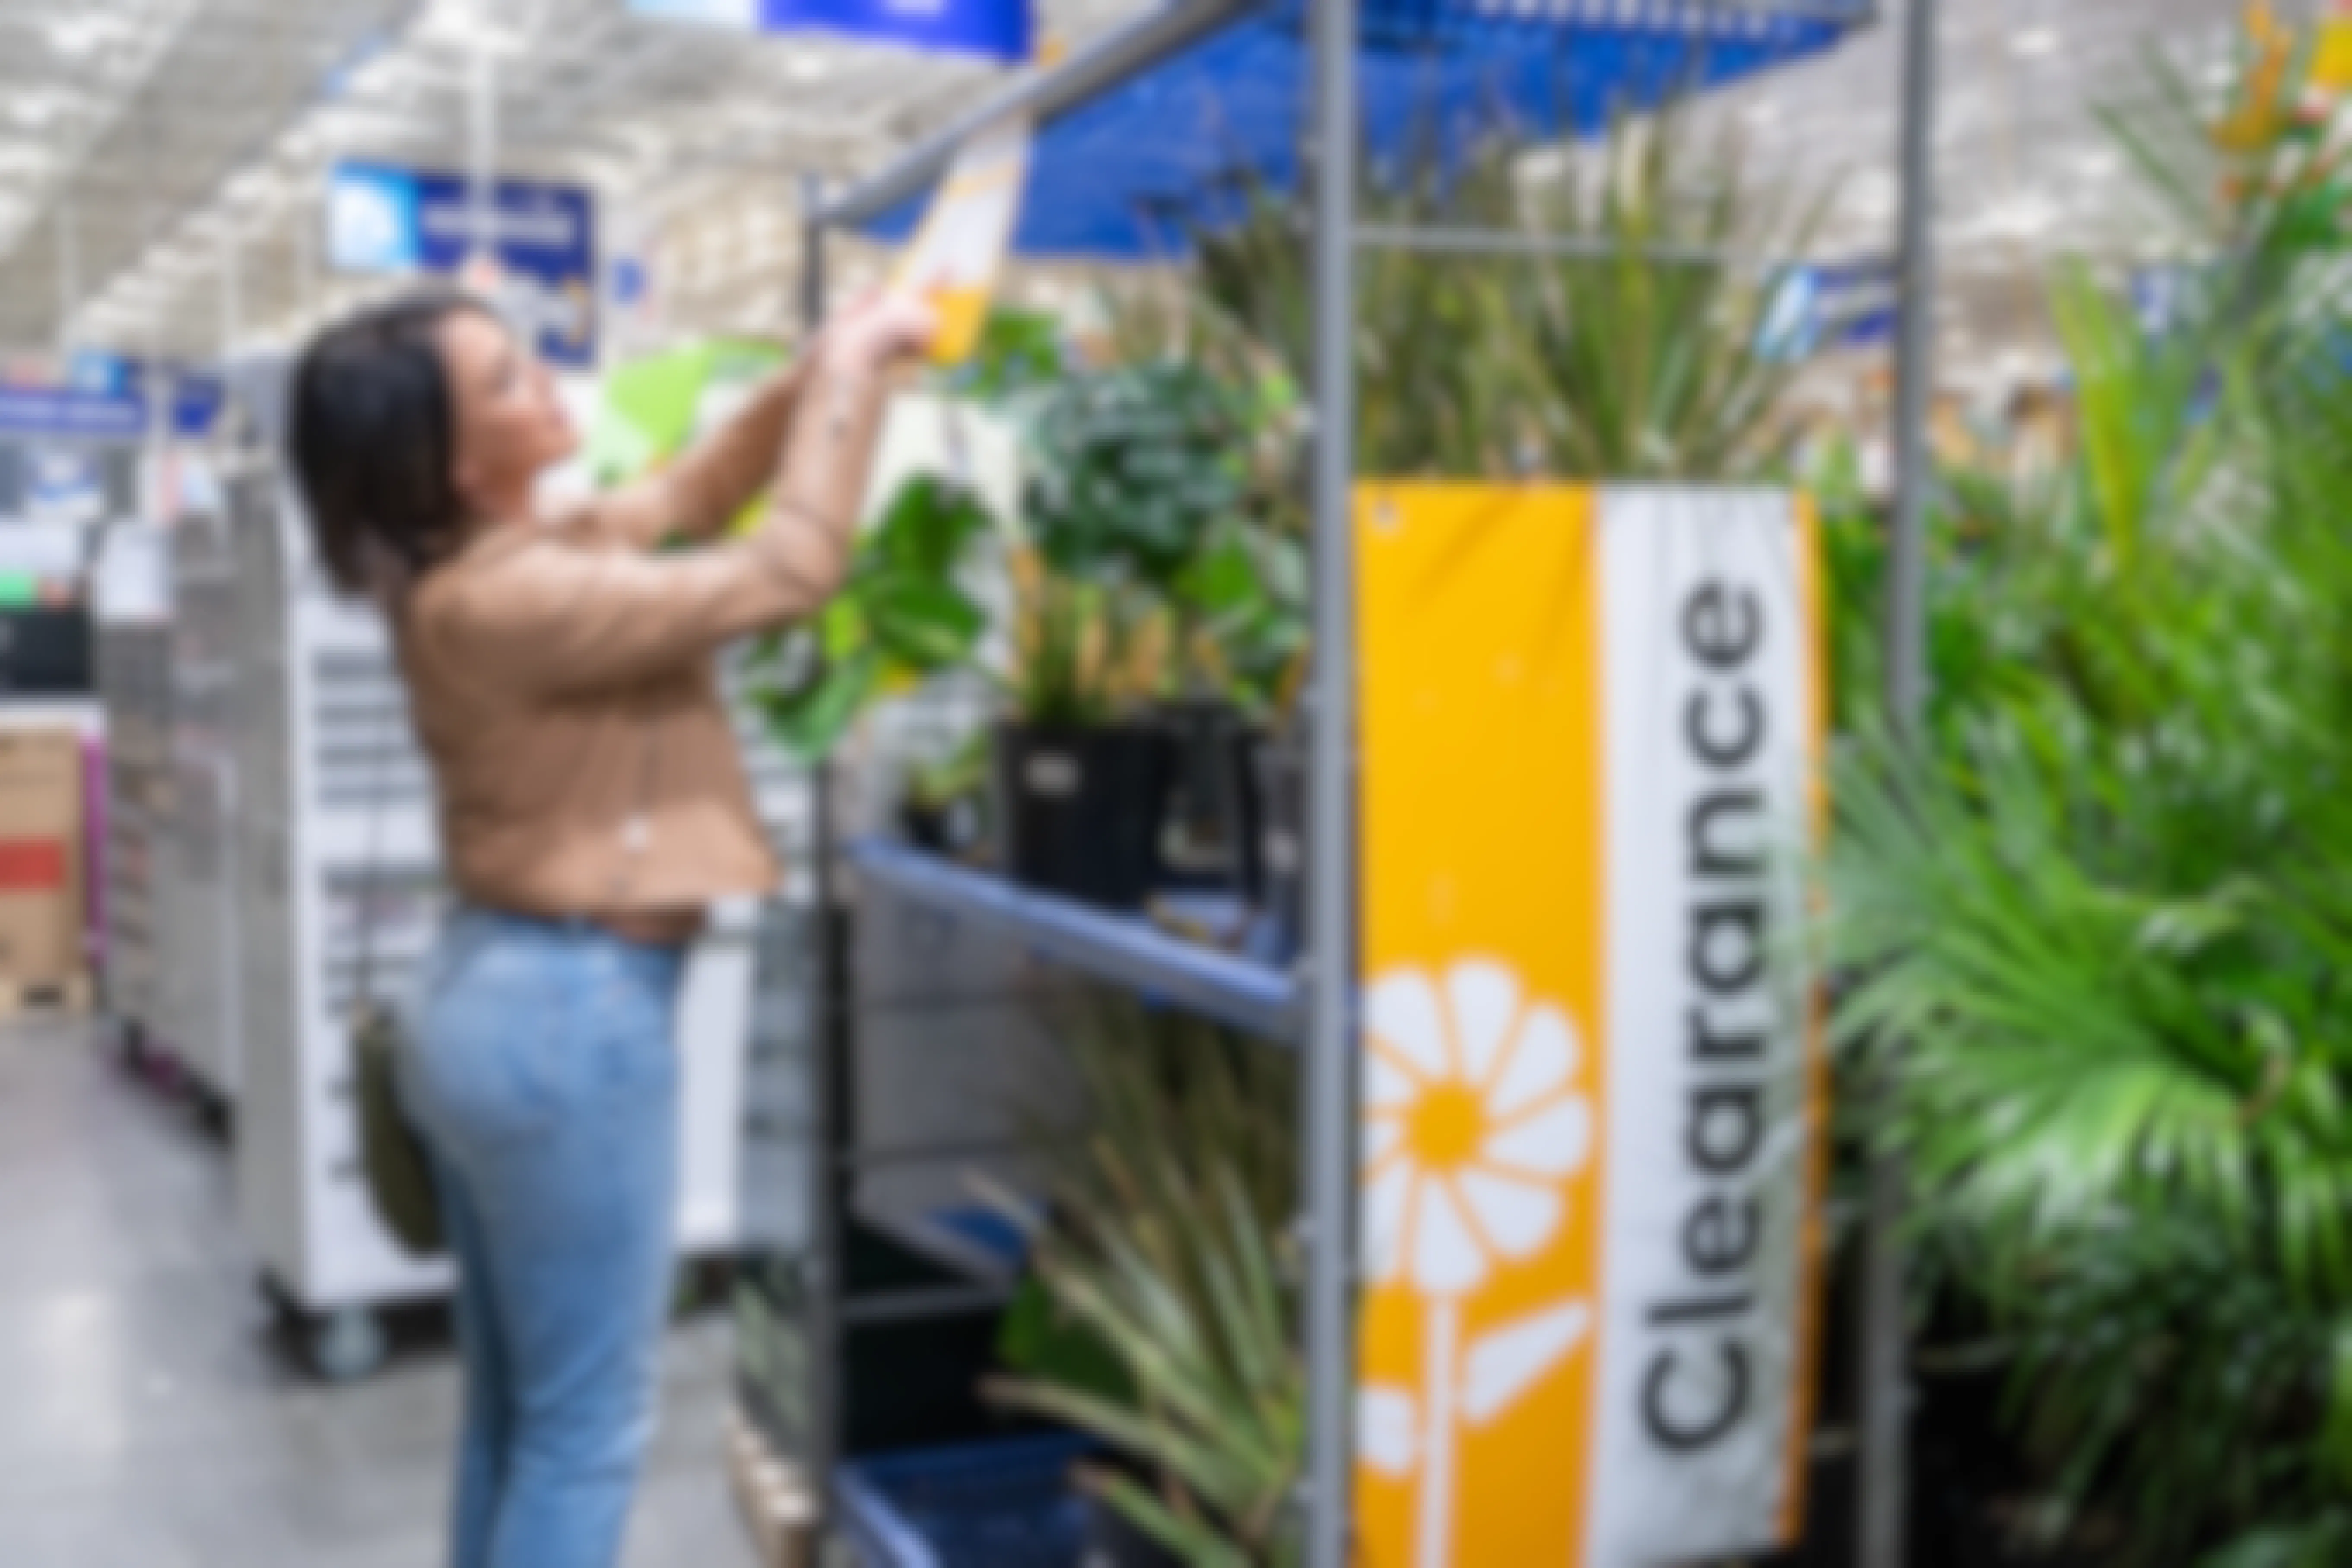 A person looking at the prices listed on a Clearance shelf of plants at Lowe's